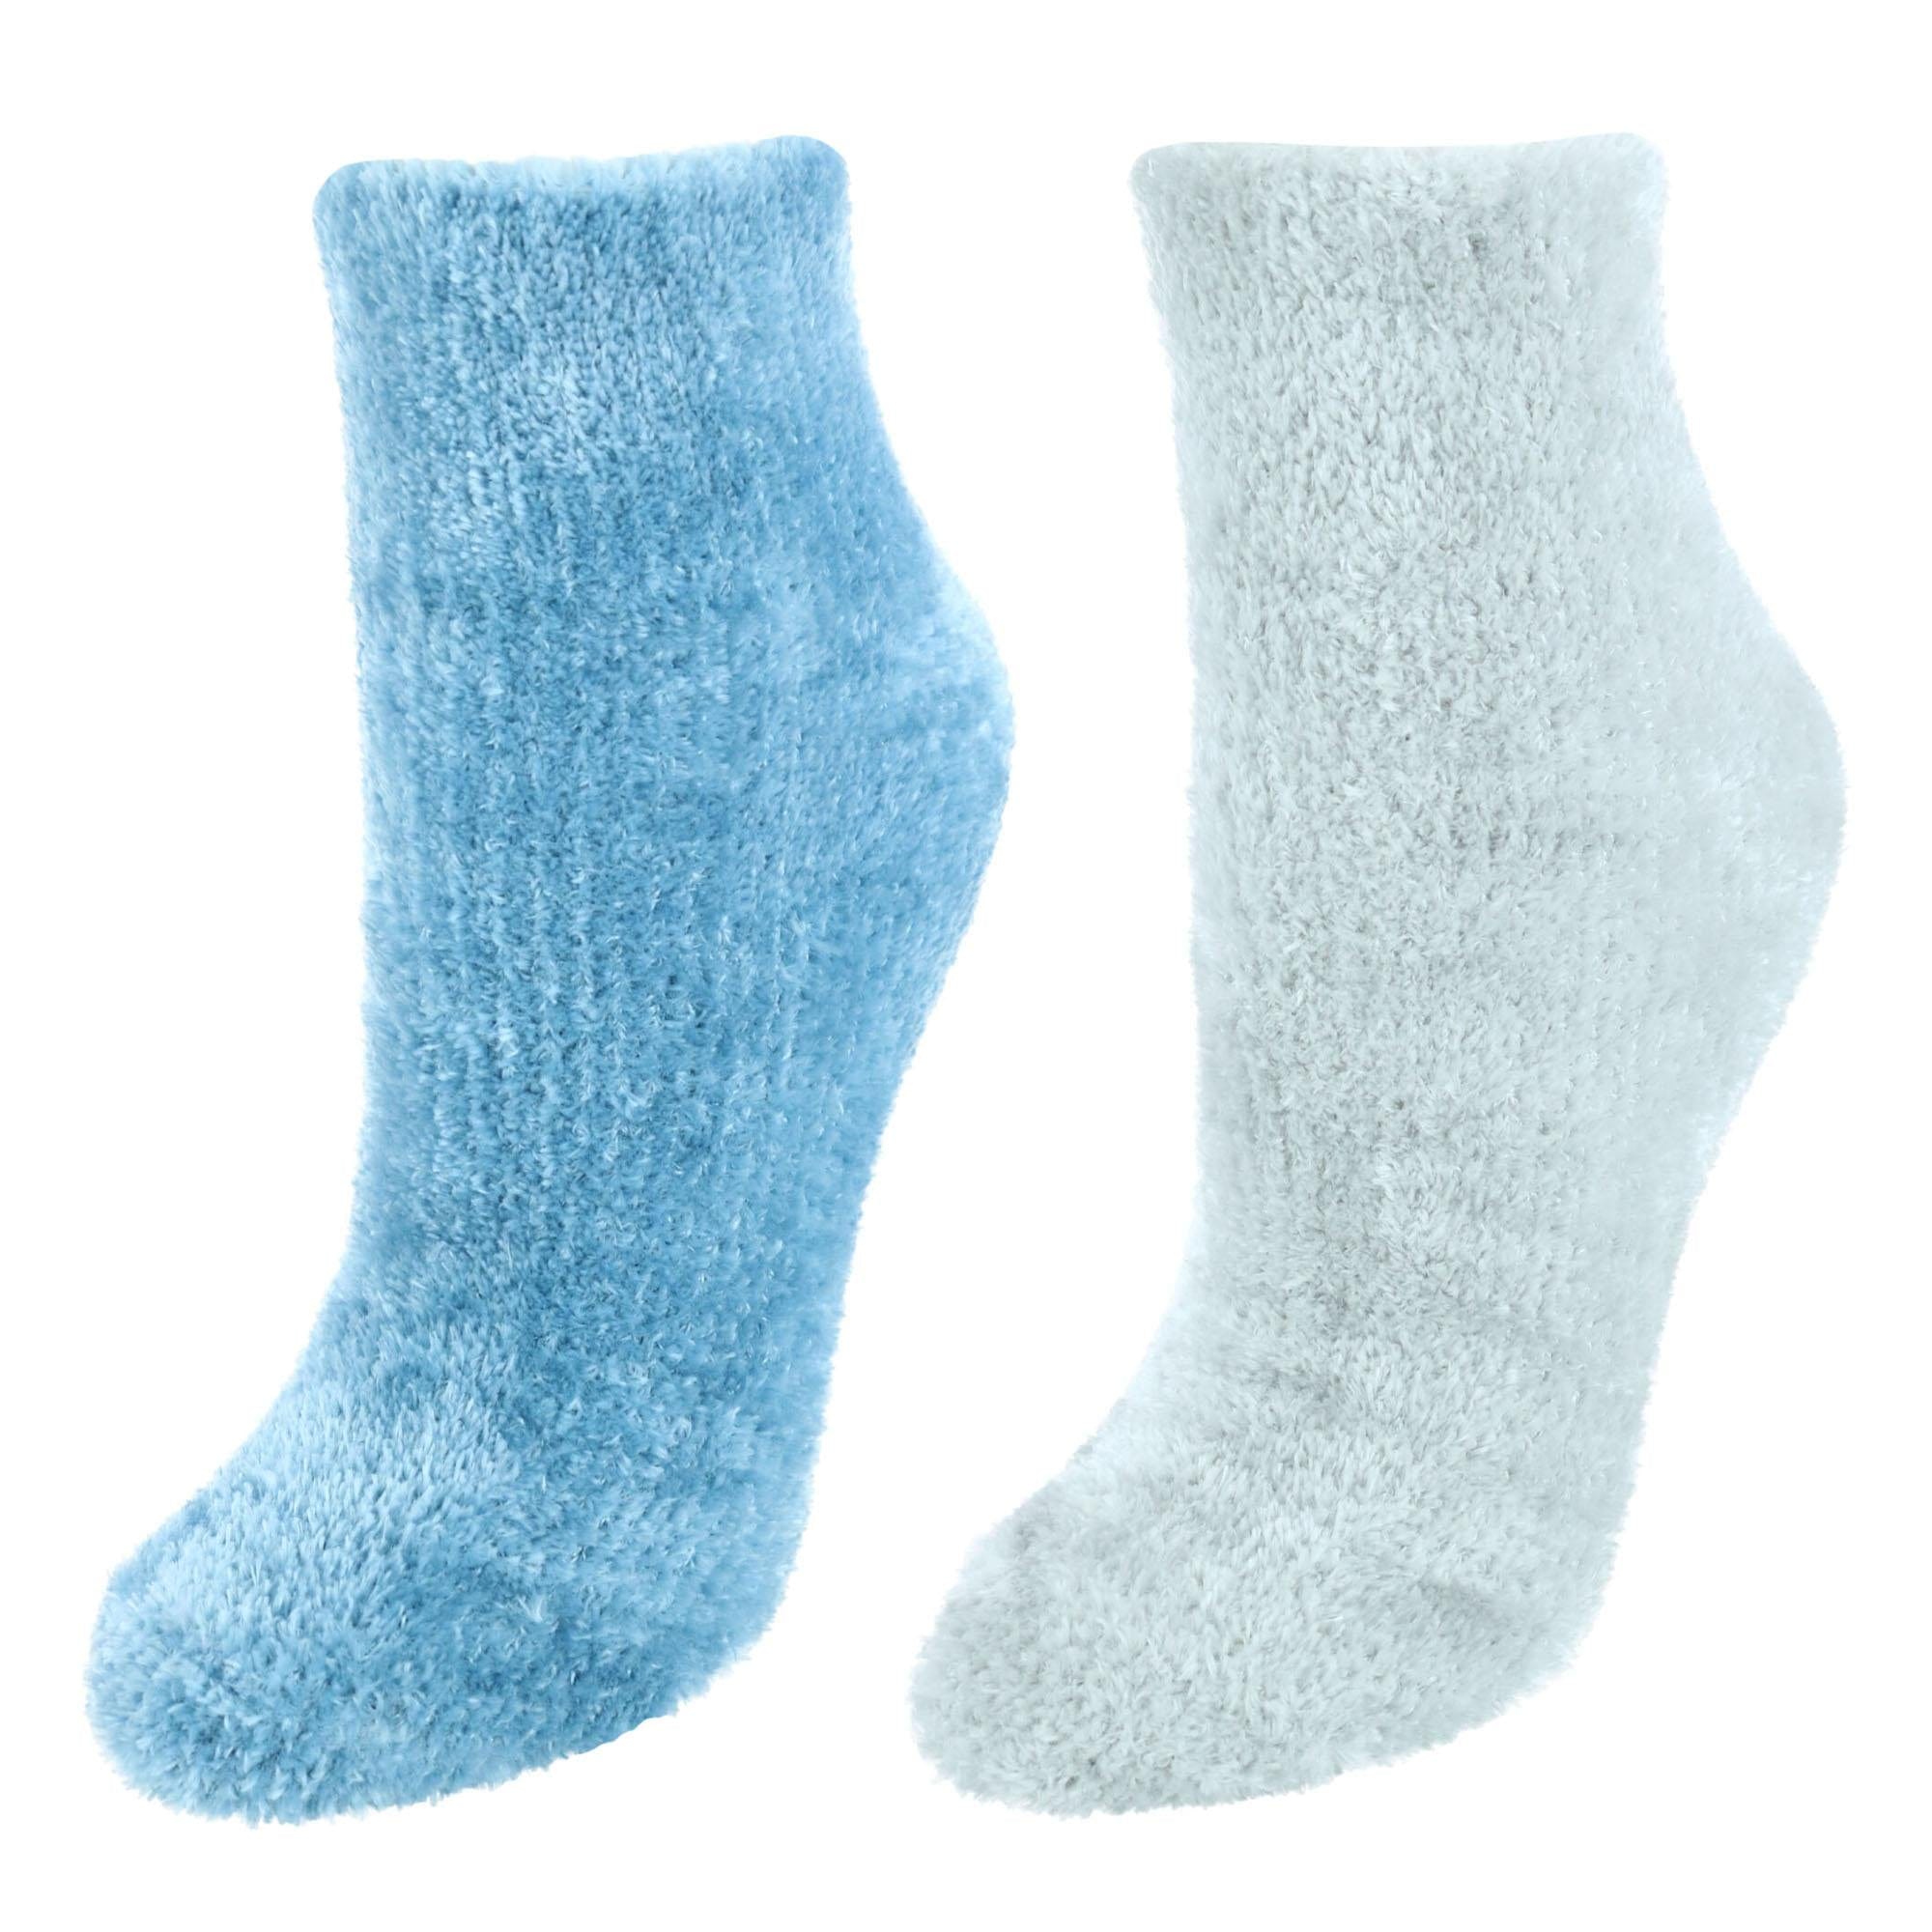 Women's Low Cut Soothing Spa Socks (2 Pair Pack) by Dr. Scholl's